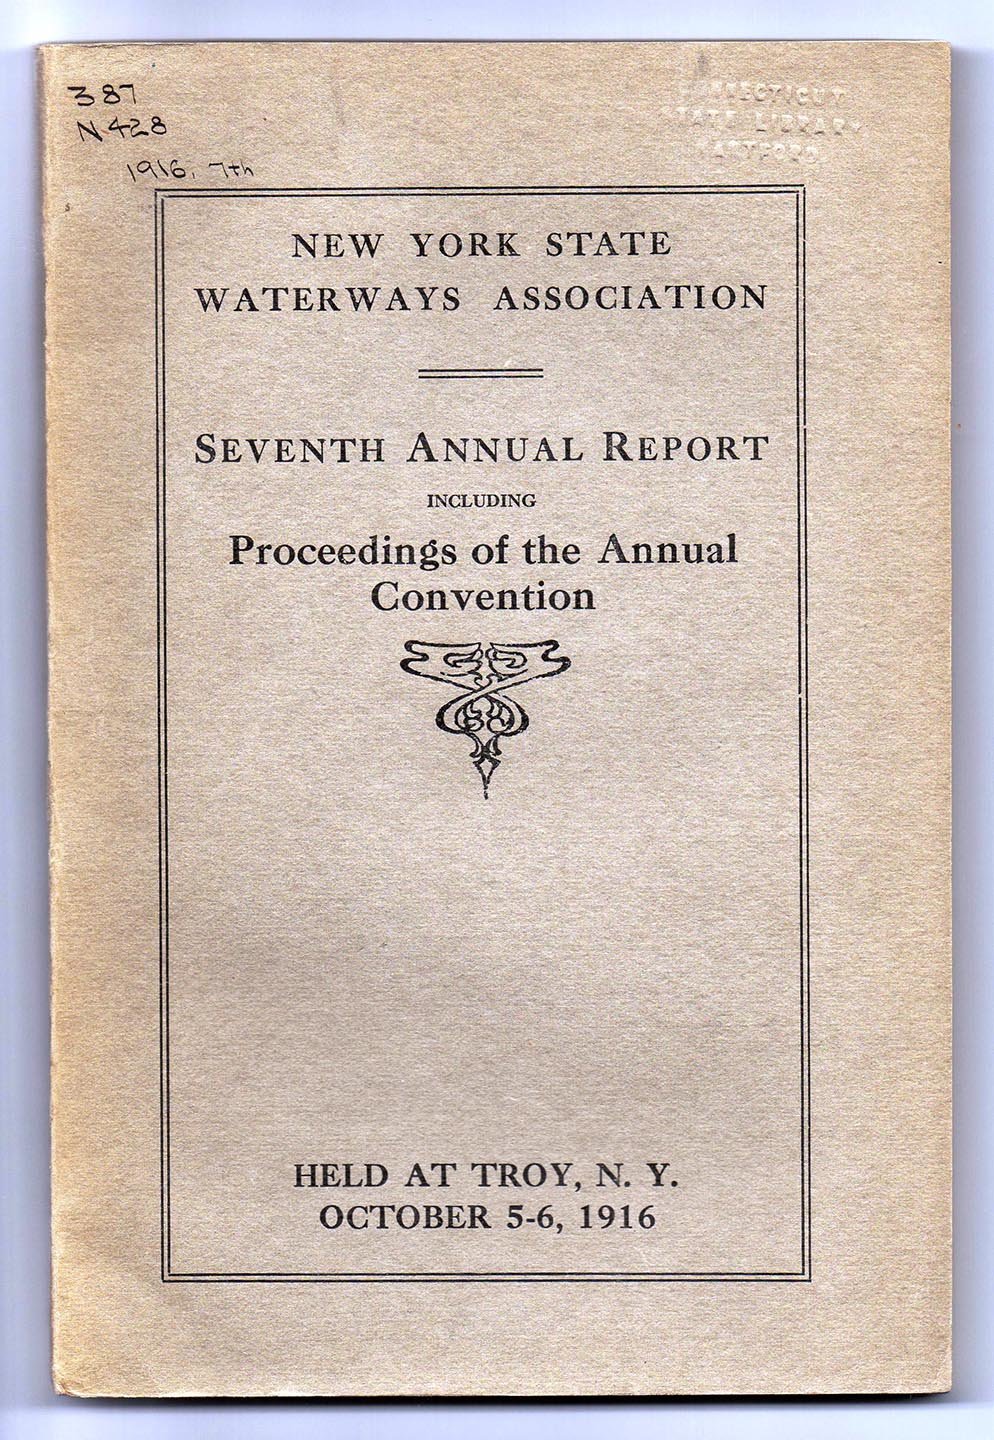 New York State Waterways Association Seventh Annual Report Including Proceedings of the Annual Convention Held at Troy, N.Y. October 5-6, 1916